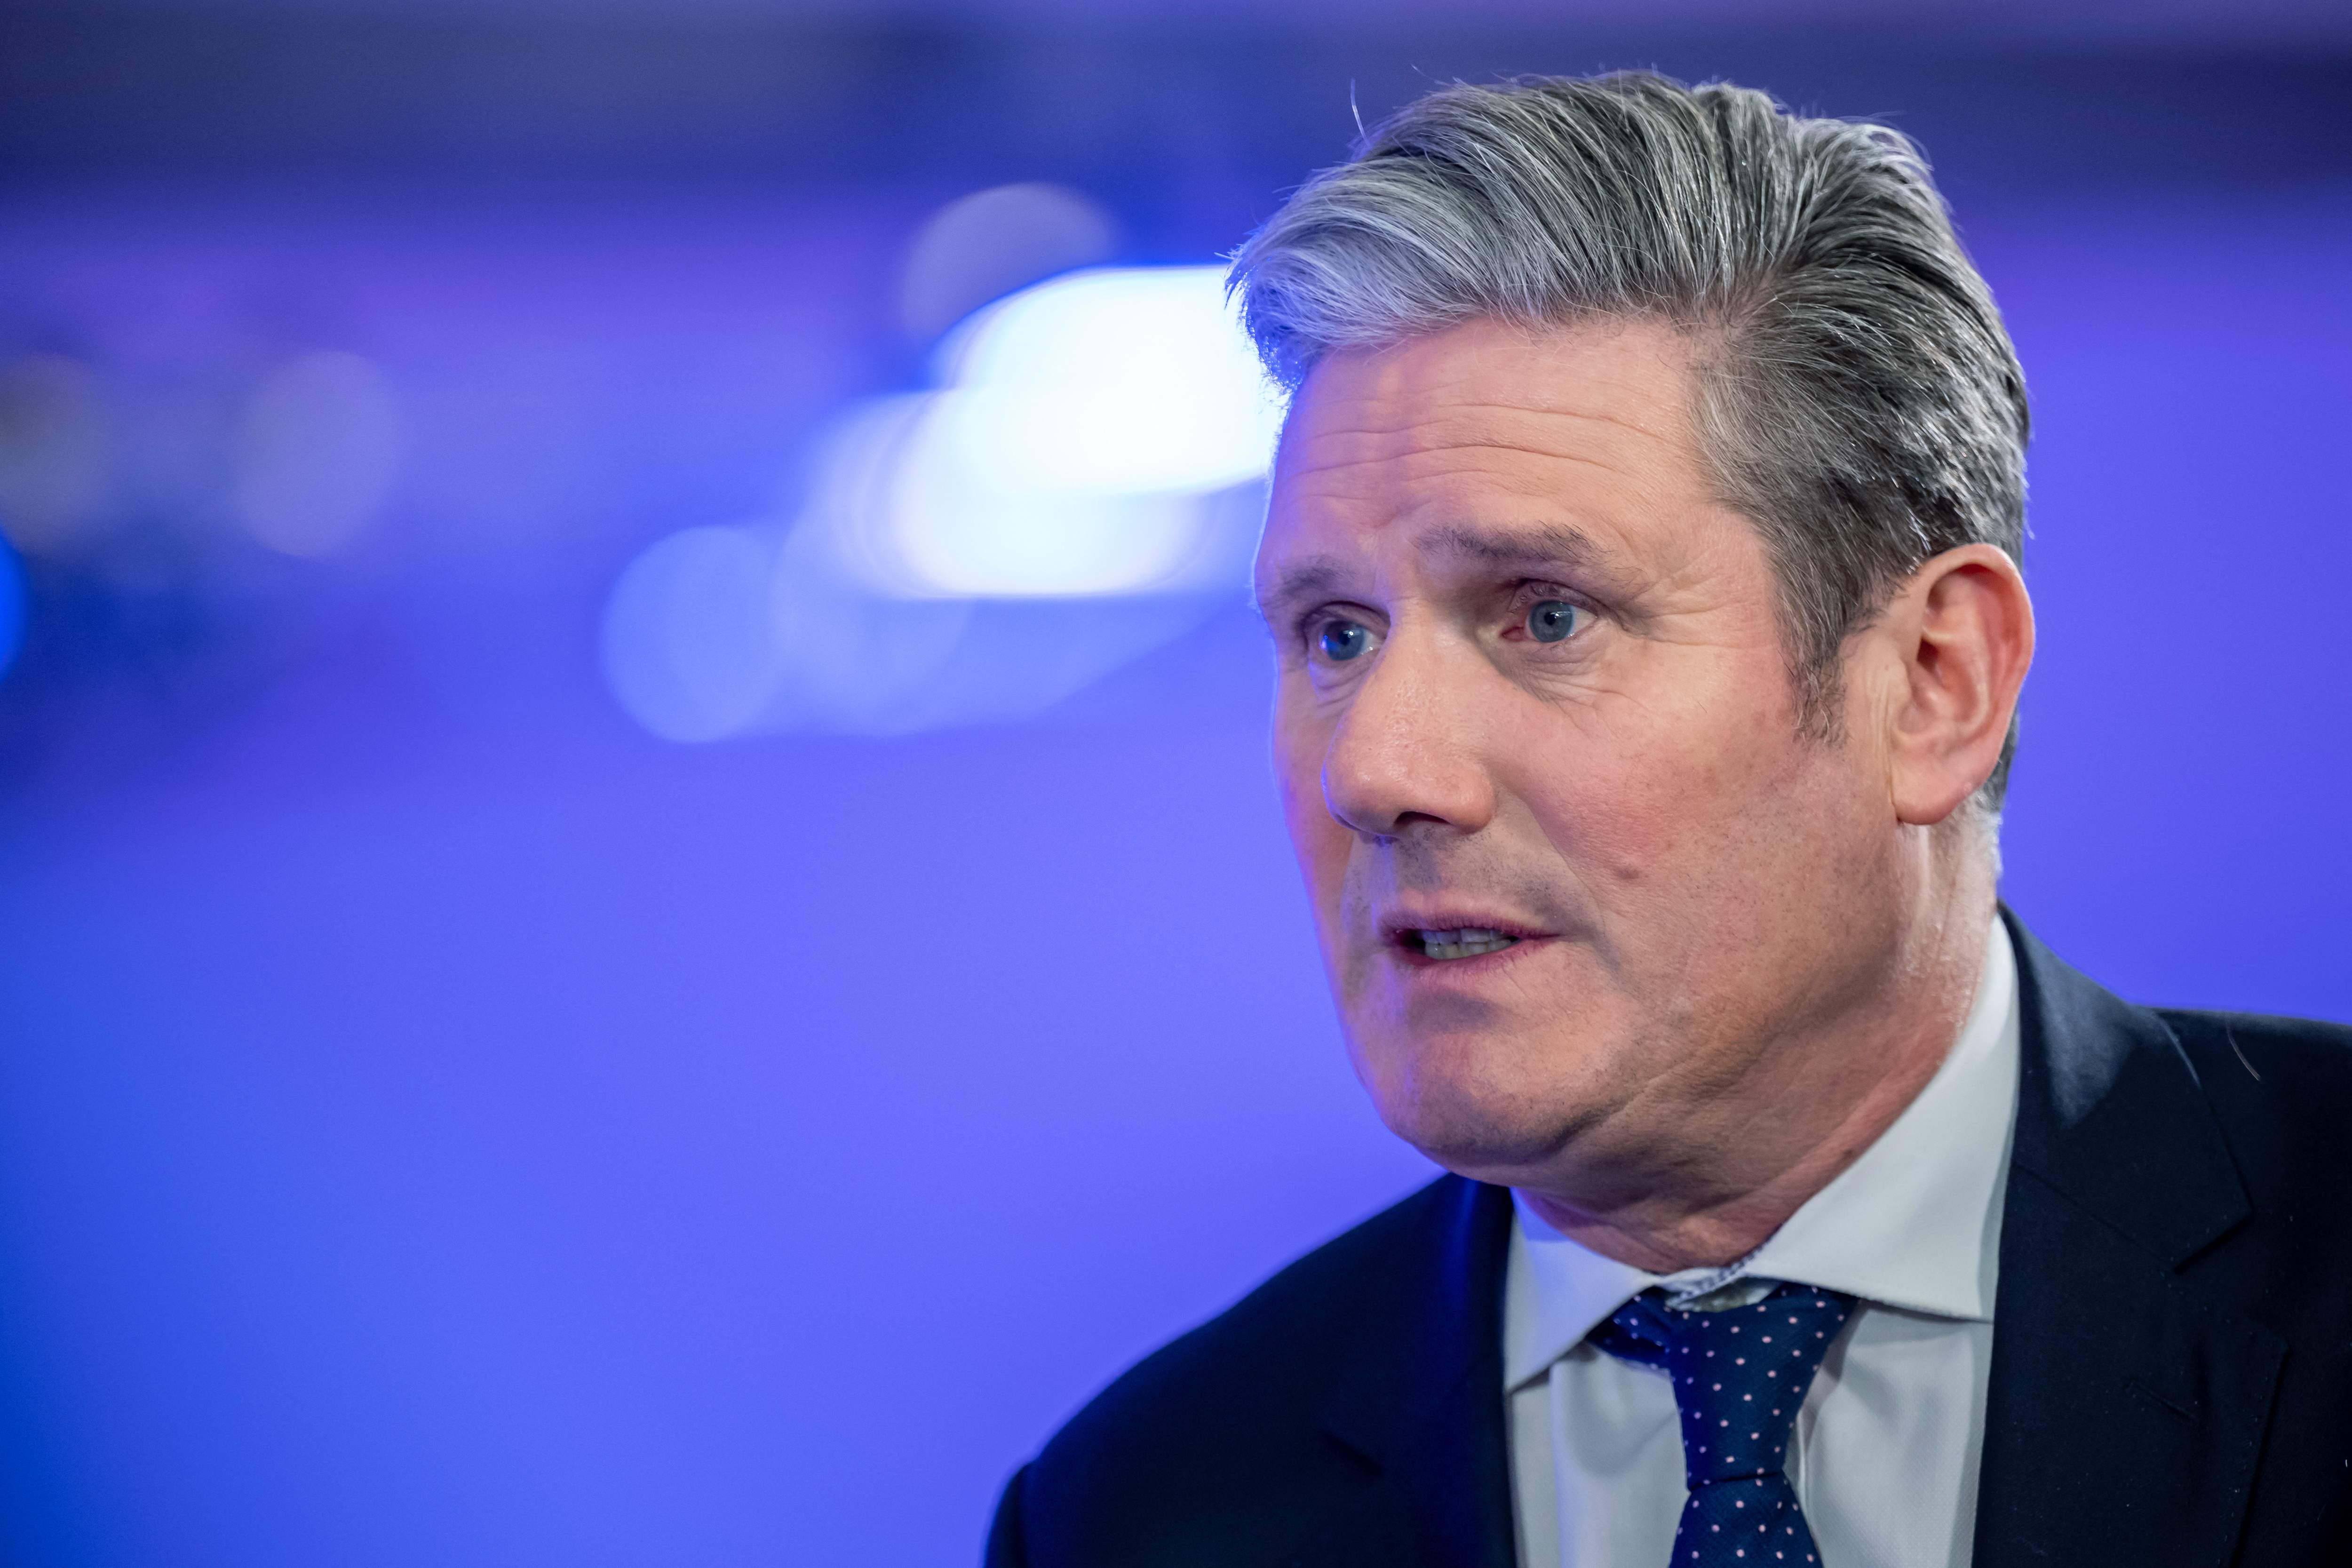 Starmer is determined not to hand ammunition to the Tories